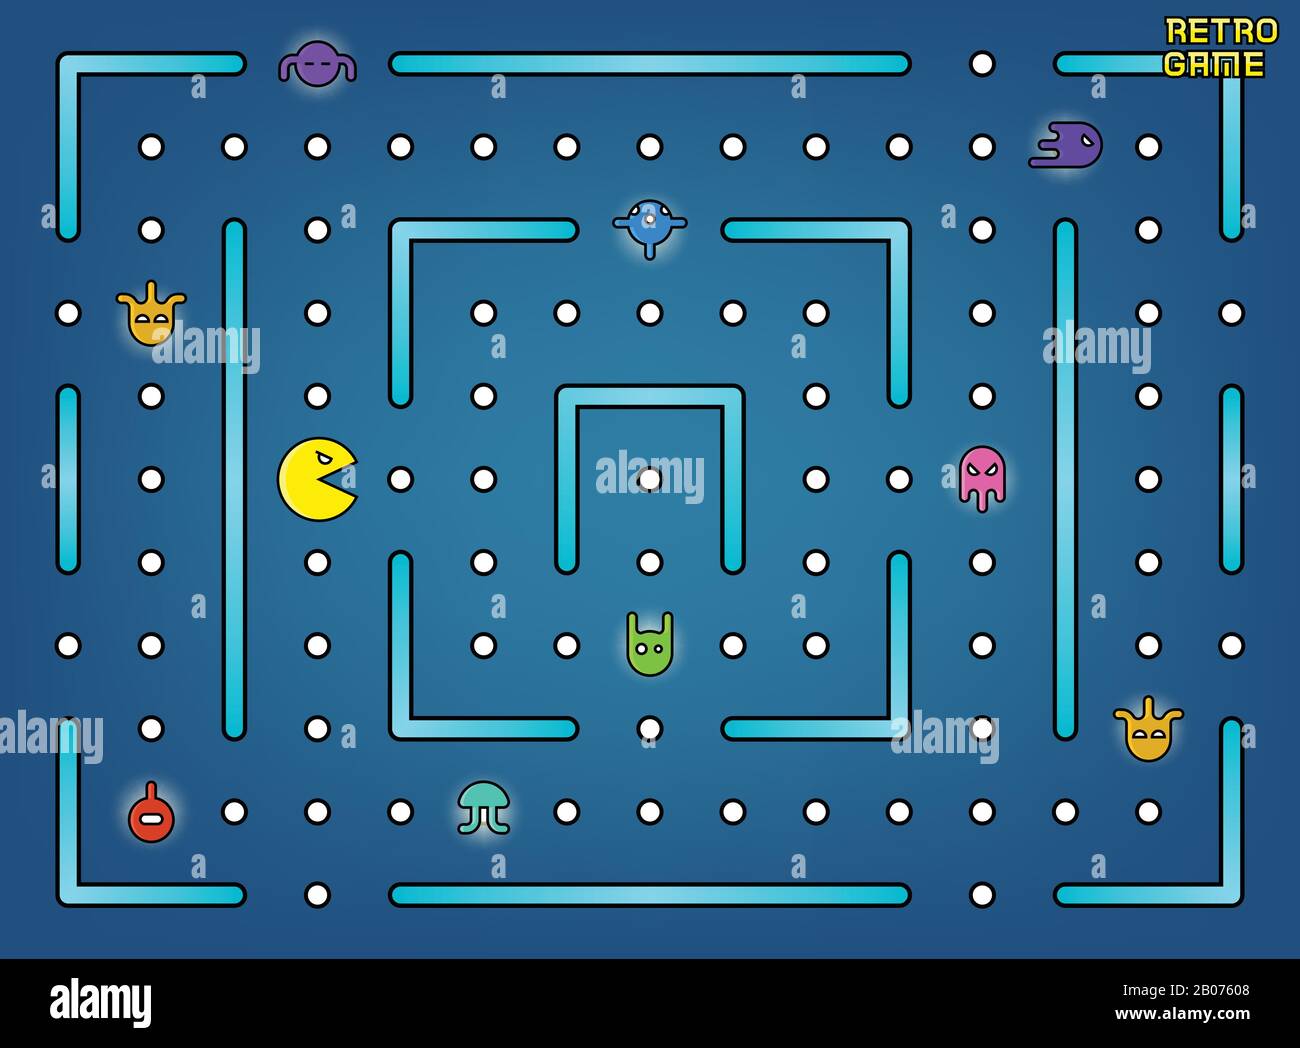 Pacman like video arcade game with ghosts, labyrinth and user interface vector. Retro game with cartoon monster illustration Stock Vector